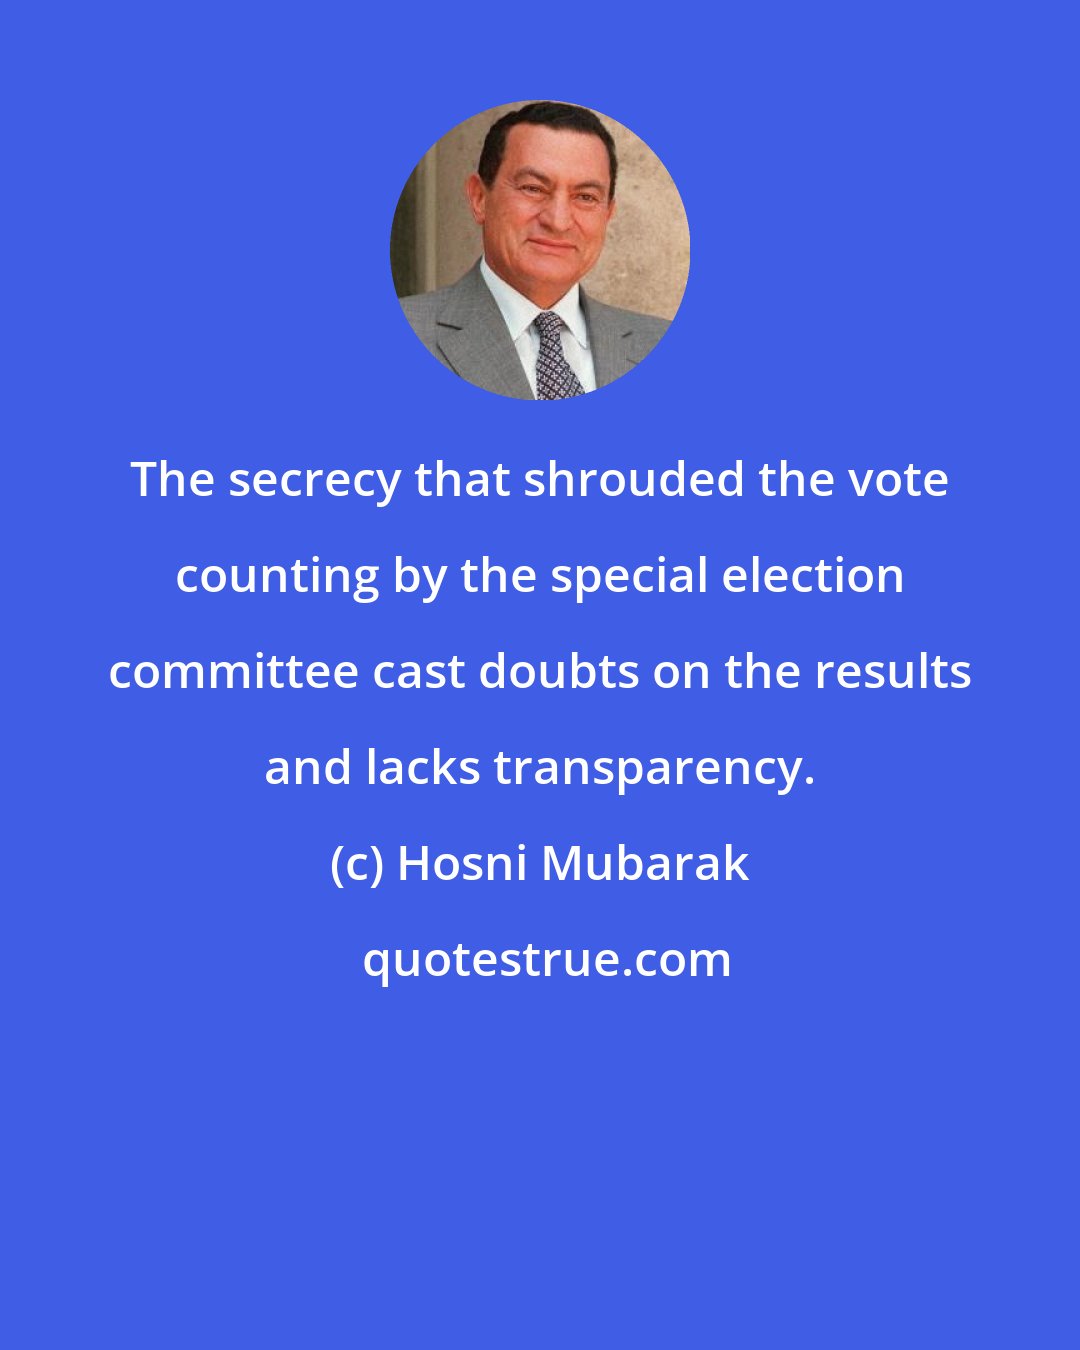 Hosni Mubarak: The secrecy that shrouded the vote counting by the special election committee cast doubts on the results and lacks transparency.